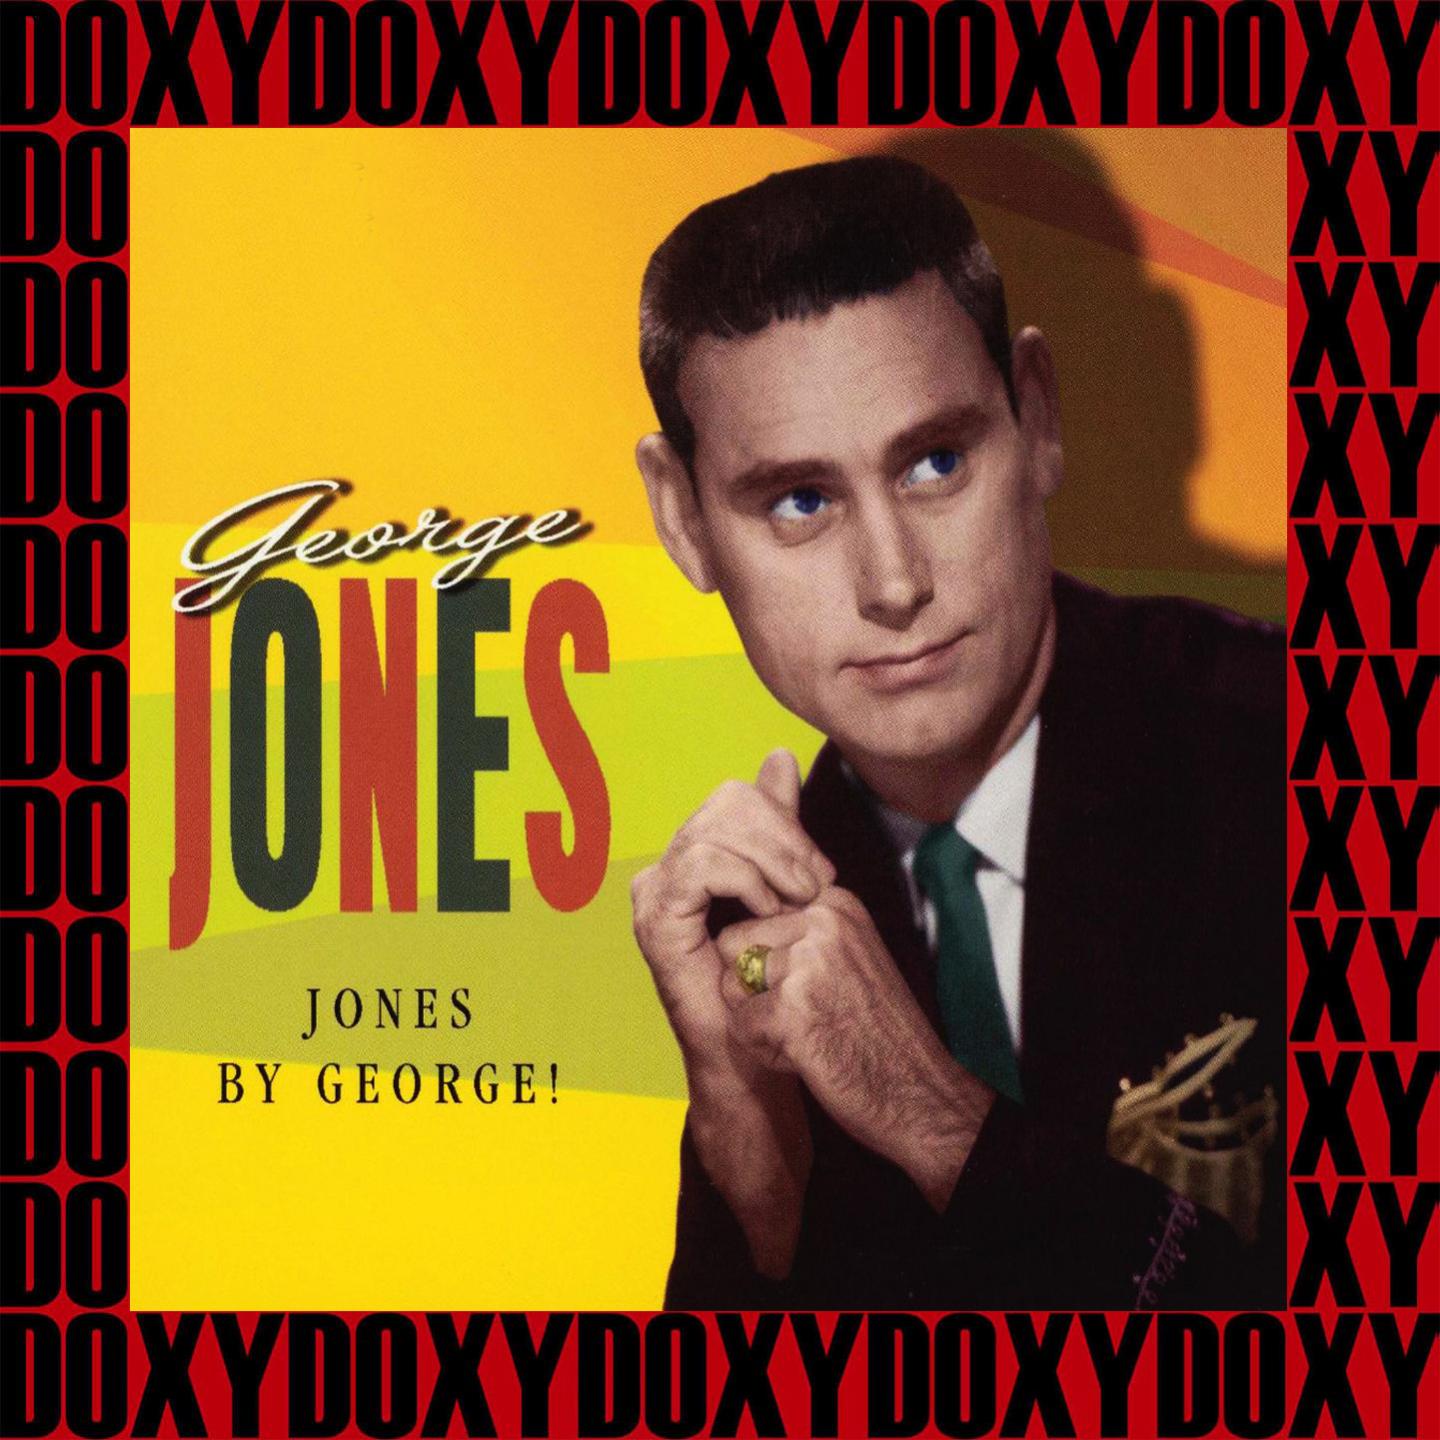 Jones by George (Remastered Version) (Doxy Collection)